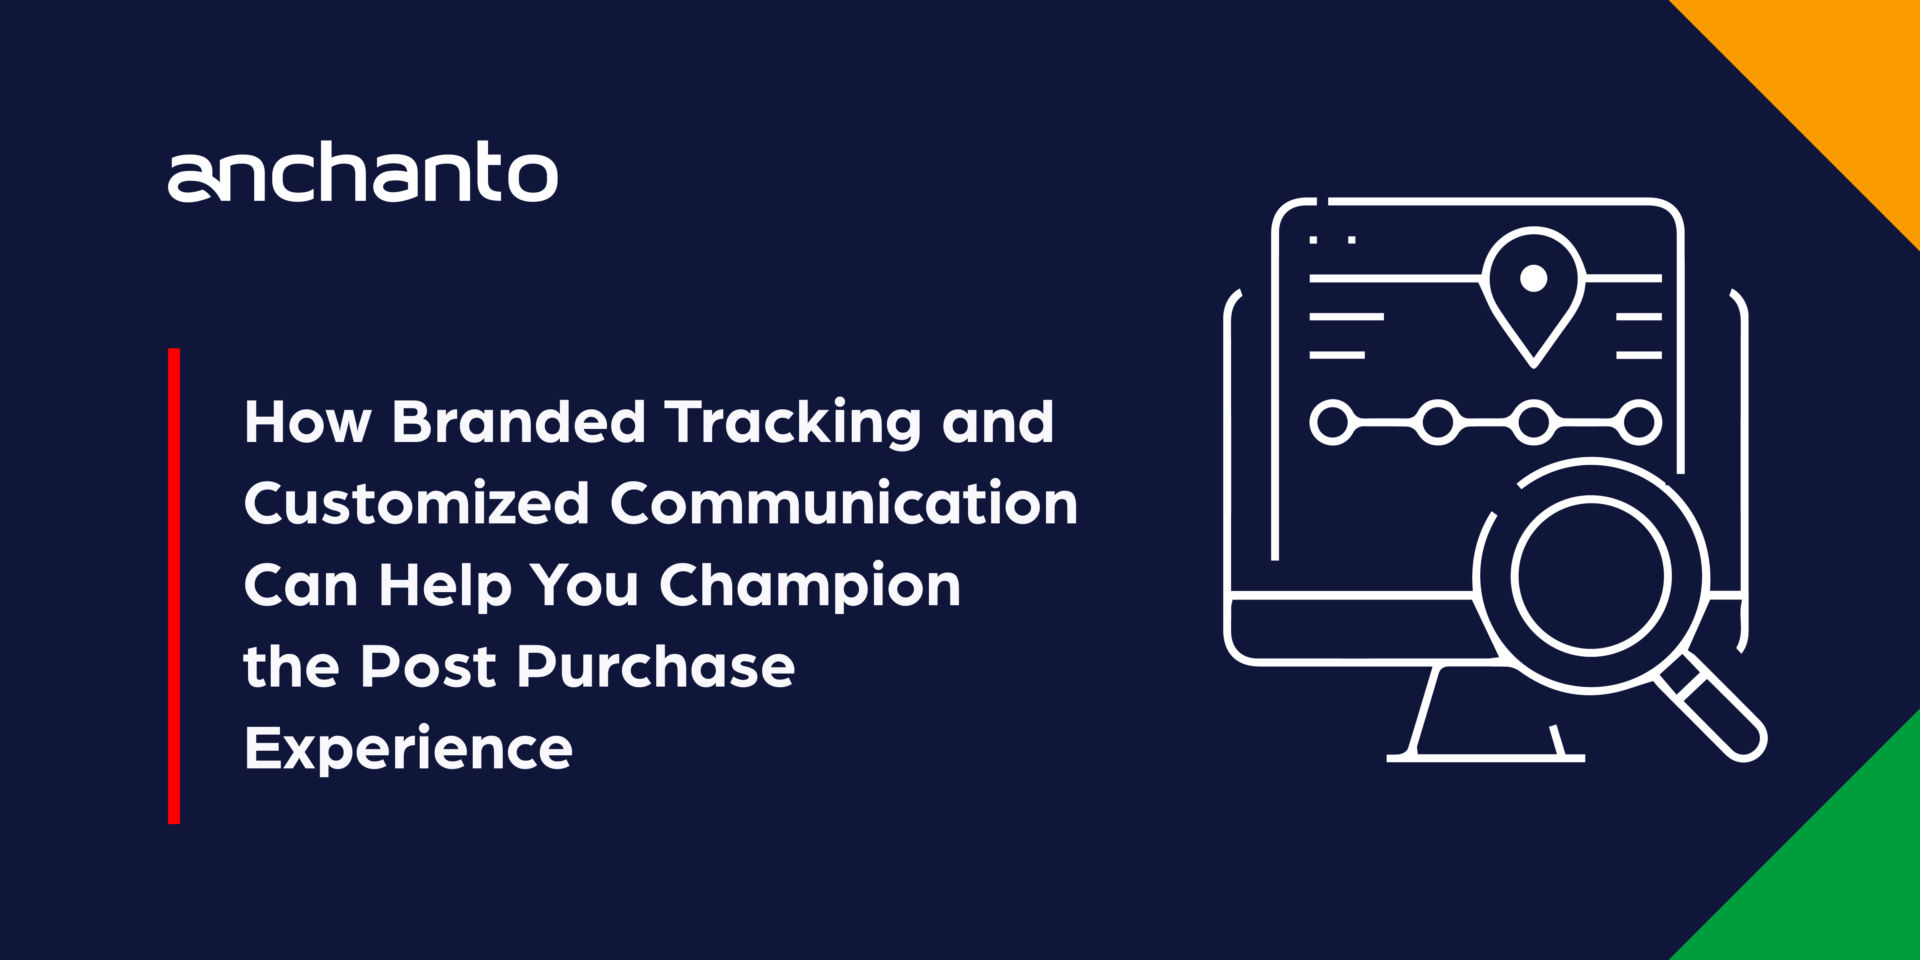 How Branded Tracking and Customized Communication Can Help You Champion the Post Purchase Experience